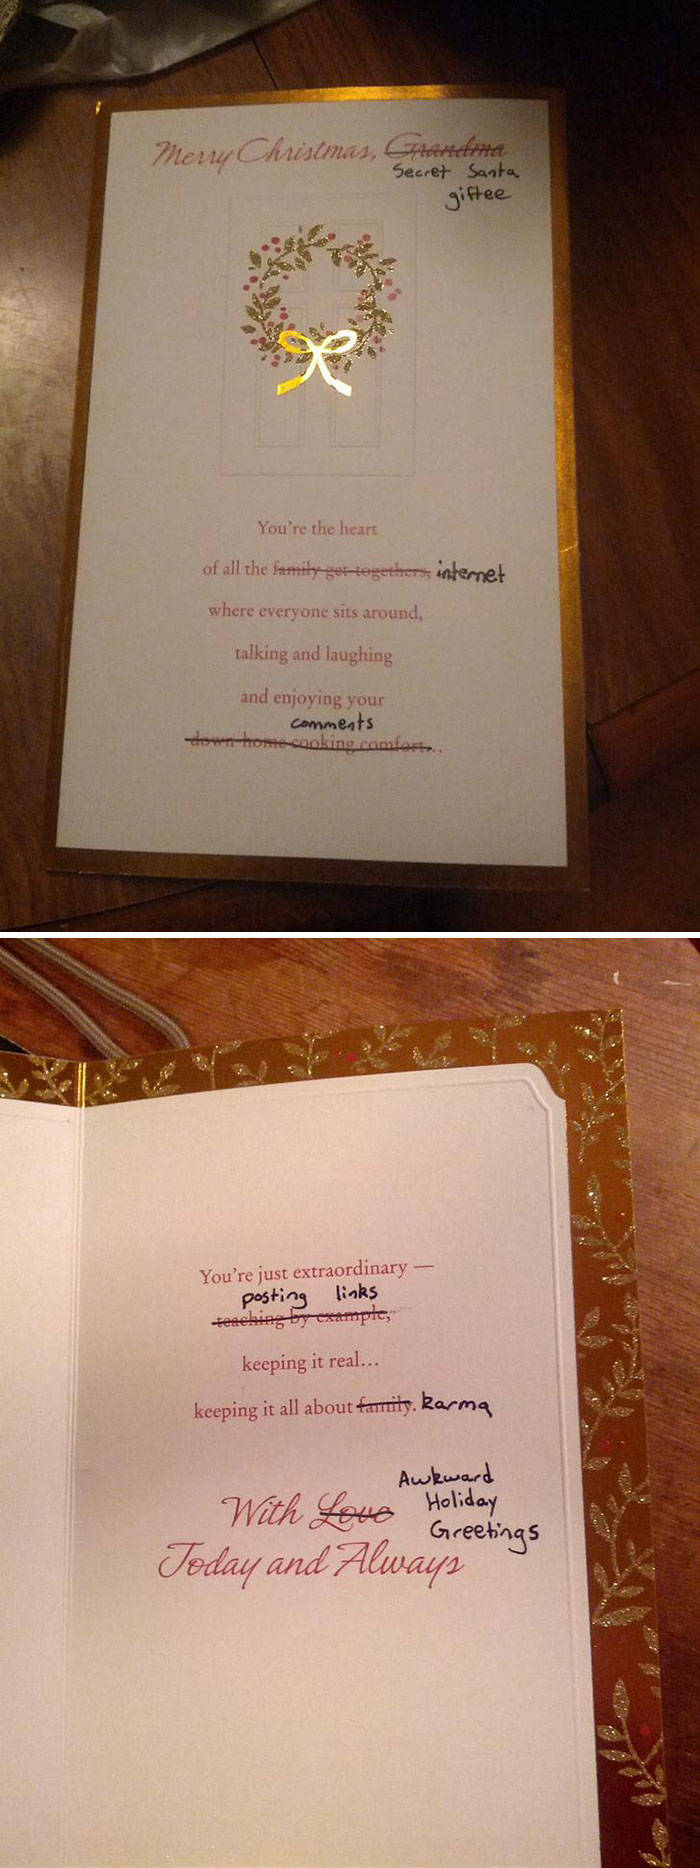 Edited Greeting Cards Are Even Better!